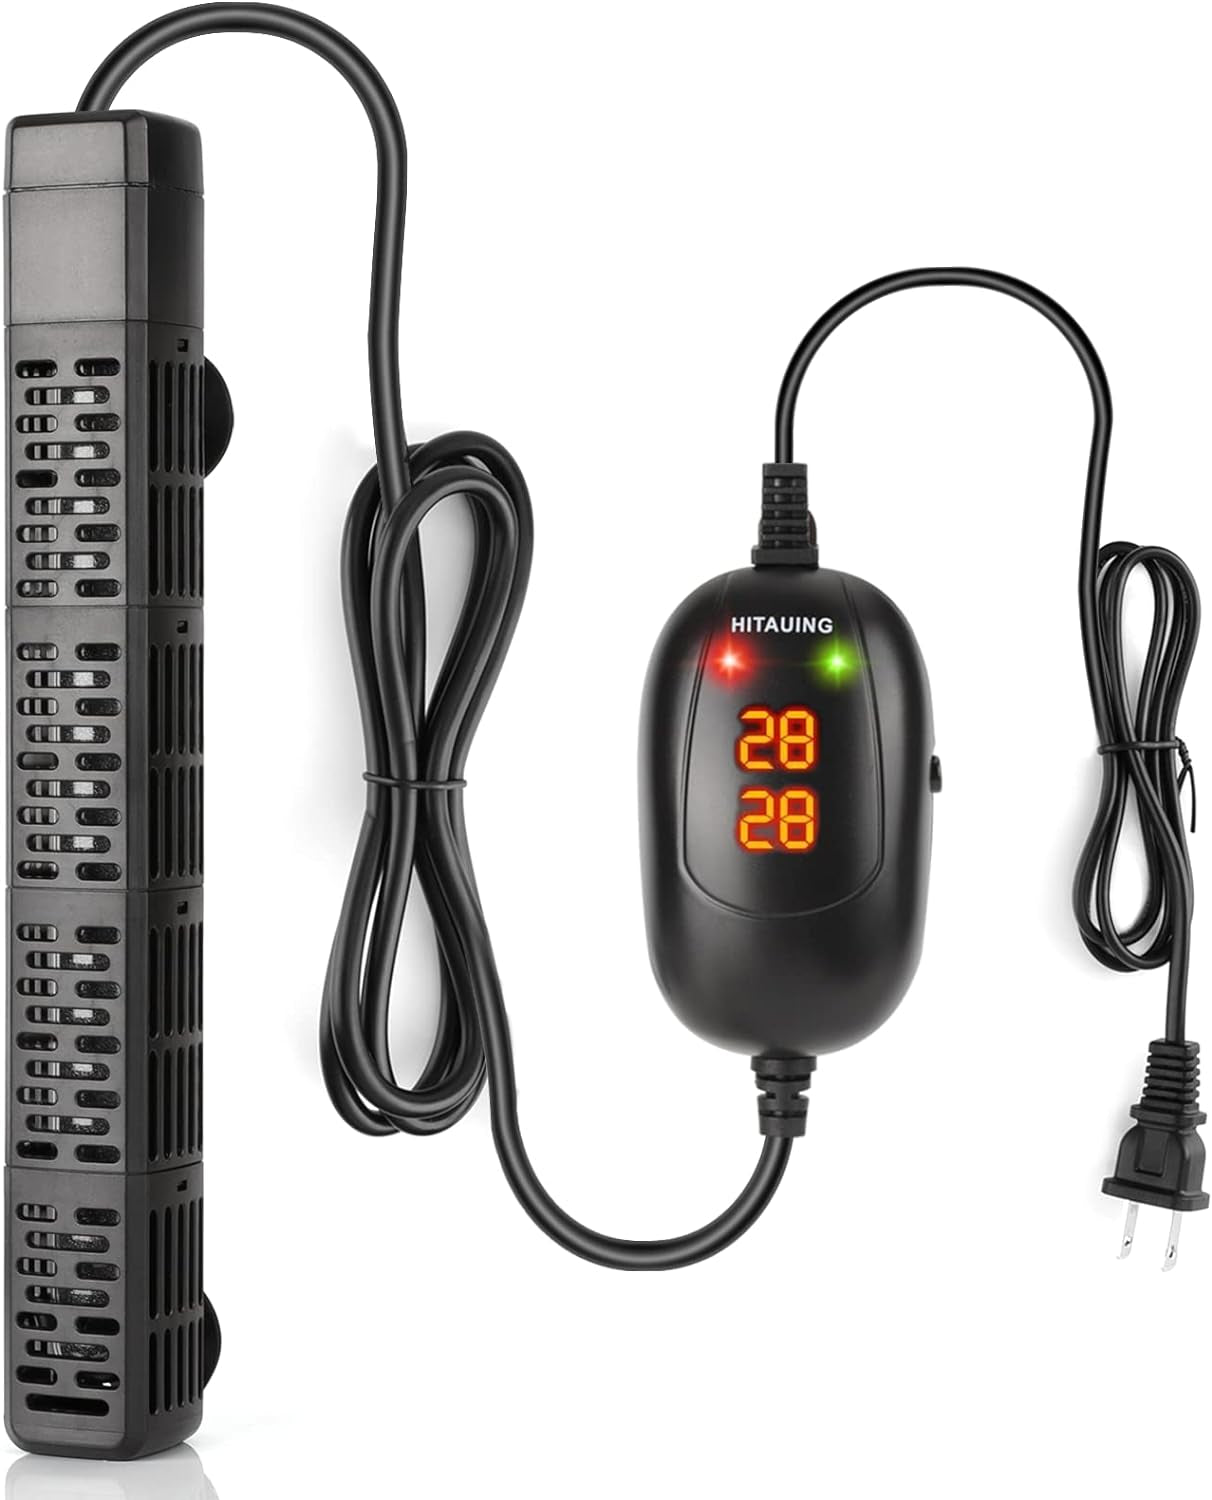 Aquarium Heater, 50W/100W/200W/300W/500W Submersible Fish Tank Heater with Over-Temperature Protection and Automatic Power-Off When Leaving Water for Saltwater and Freshwater